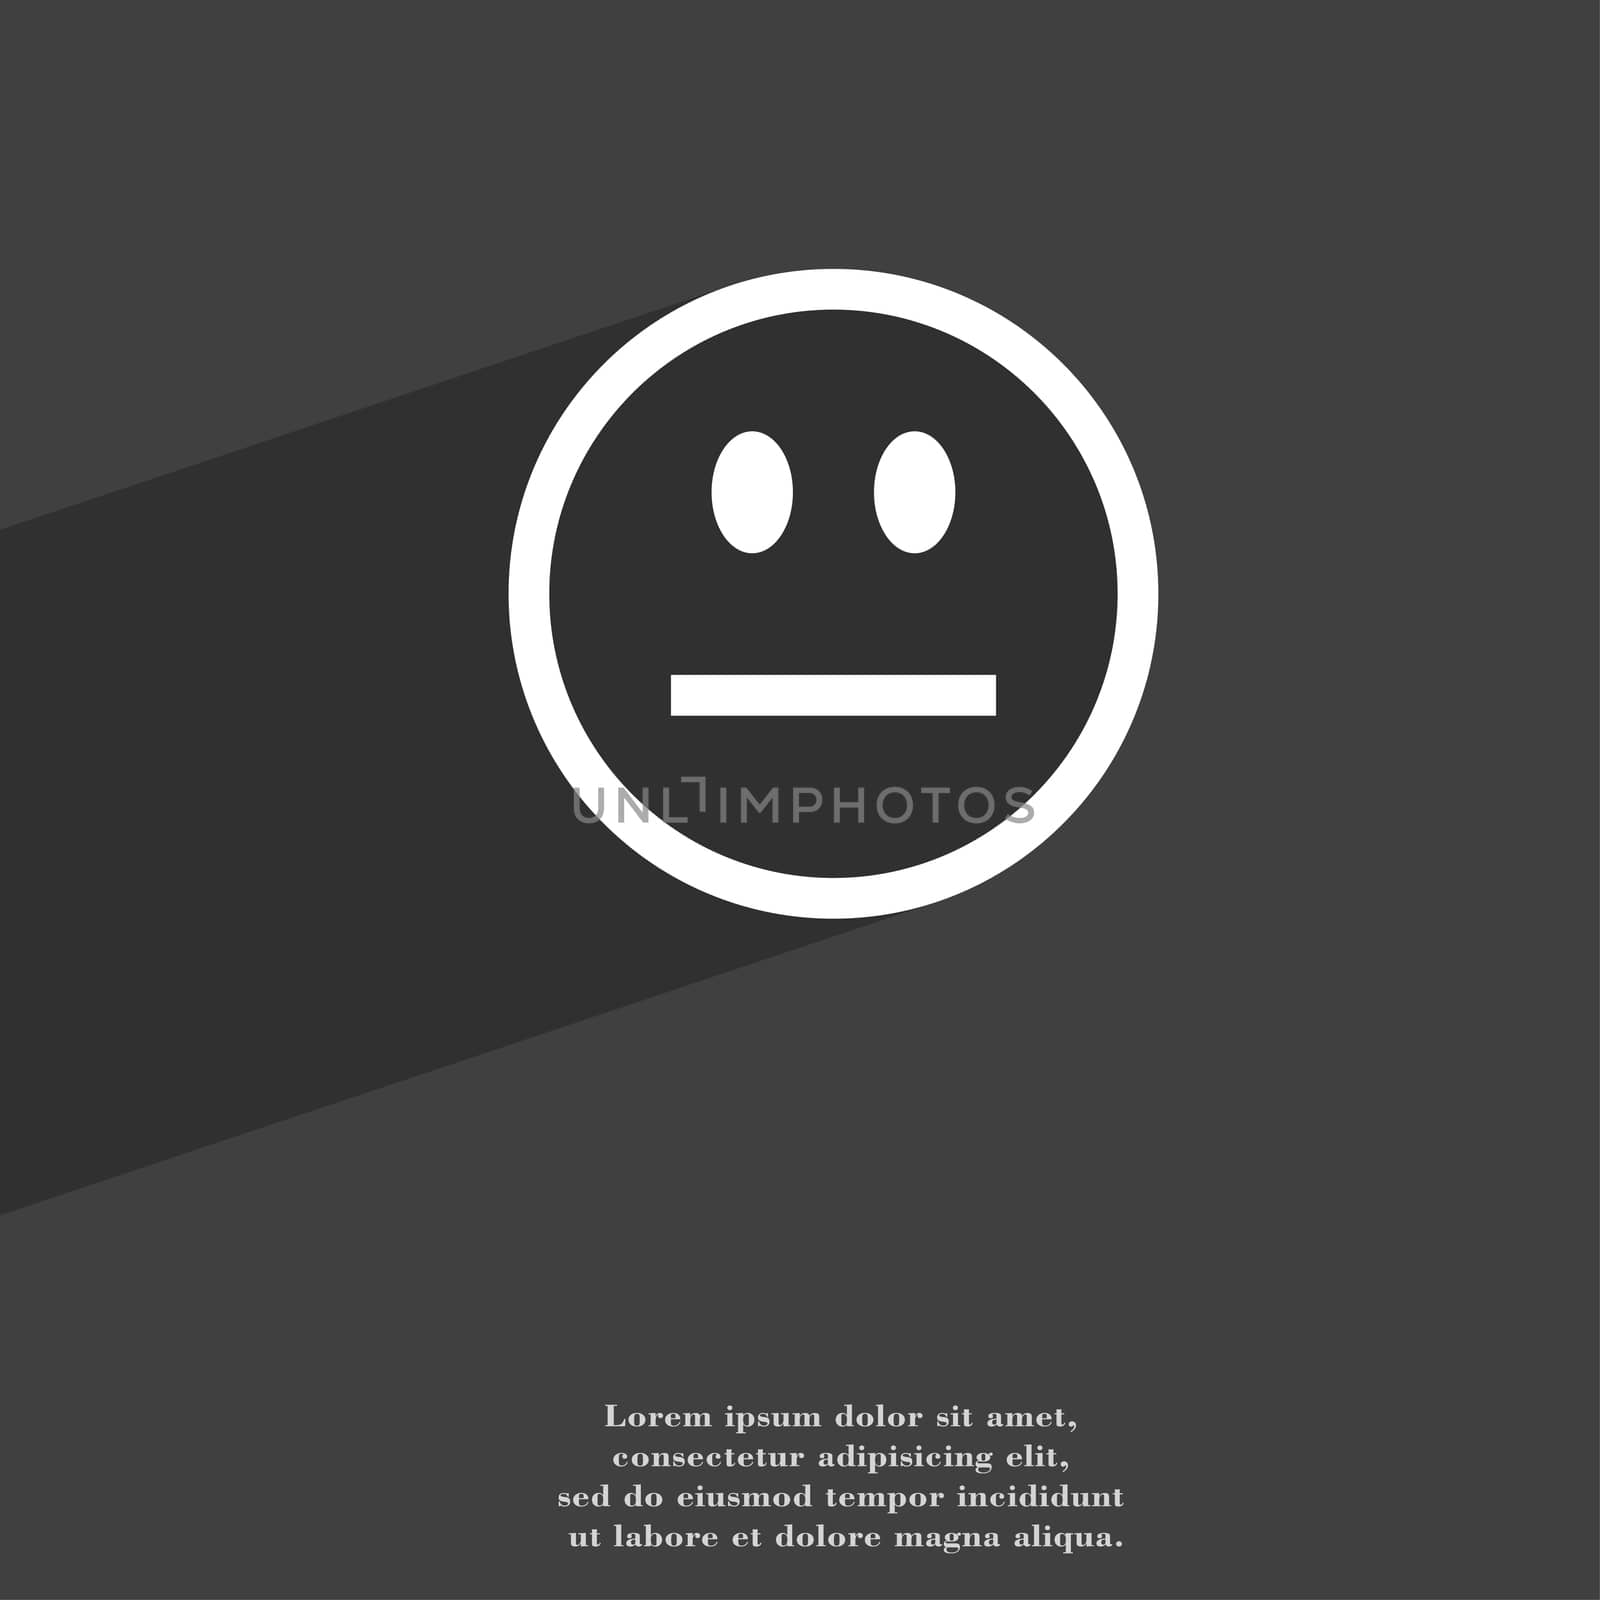 Sad face, Sadness depression icon symbol Flat modern web design with long shadow and space for your text. illustration